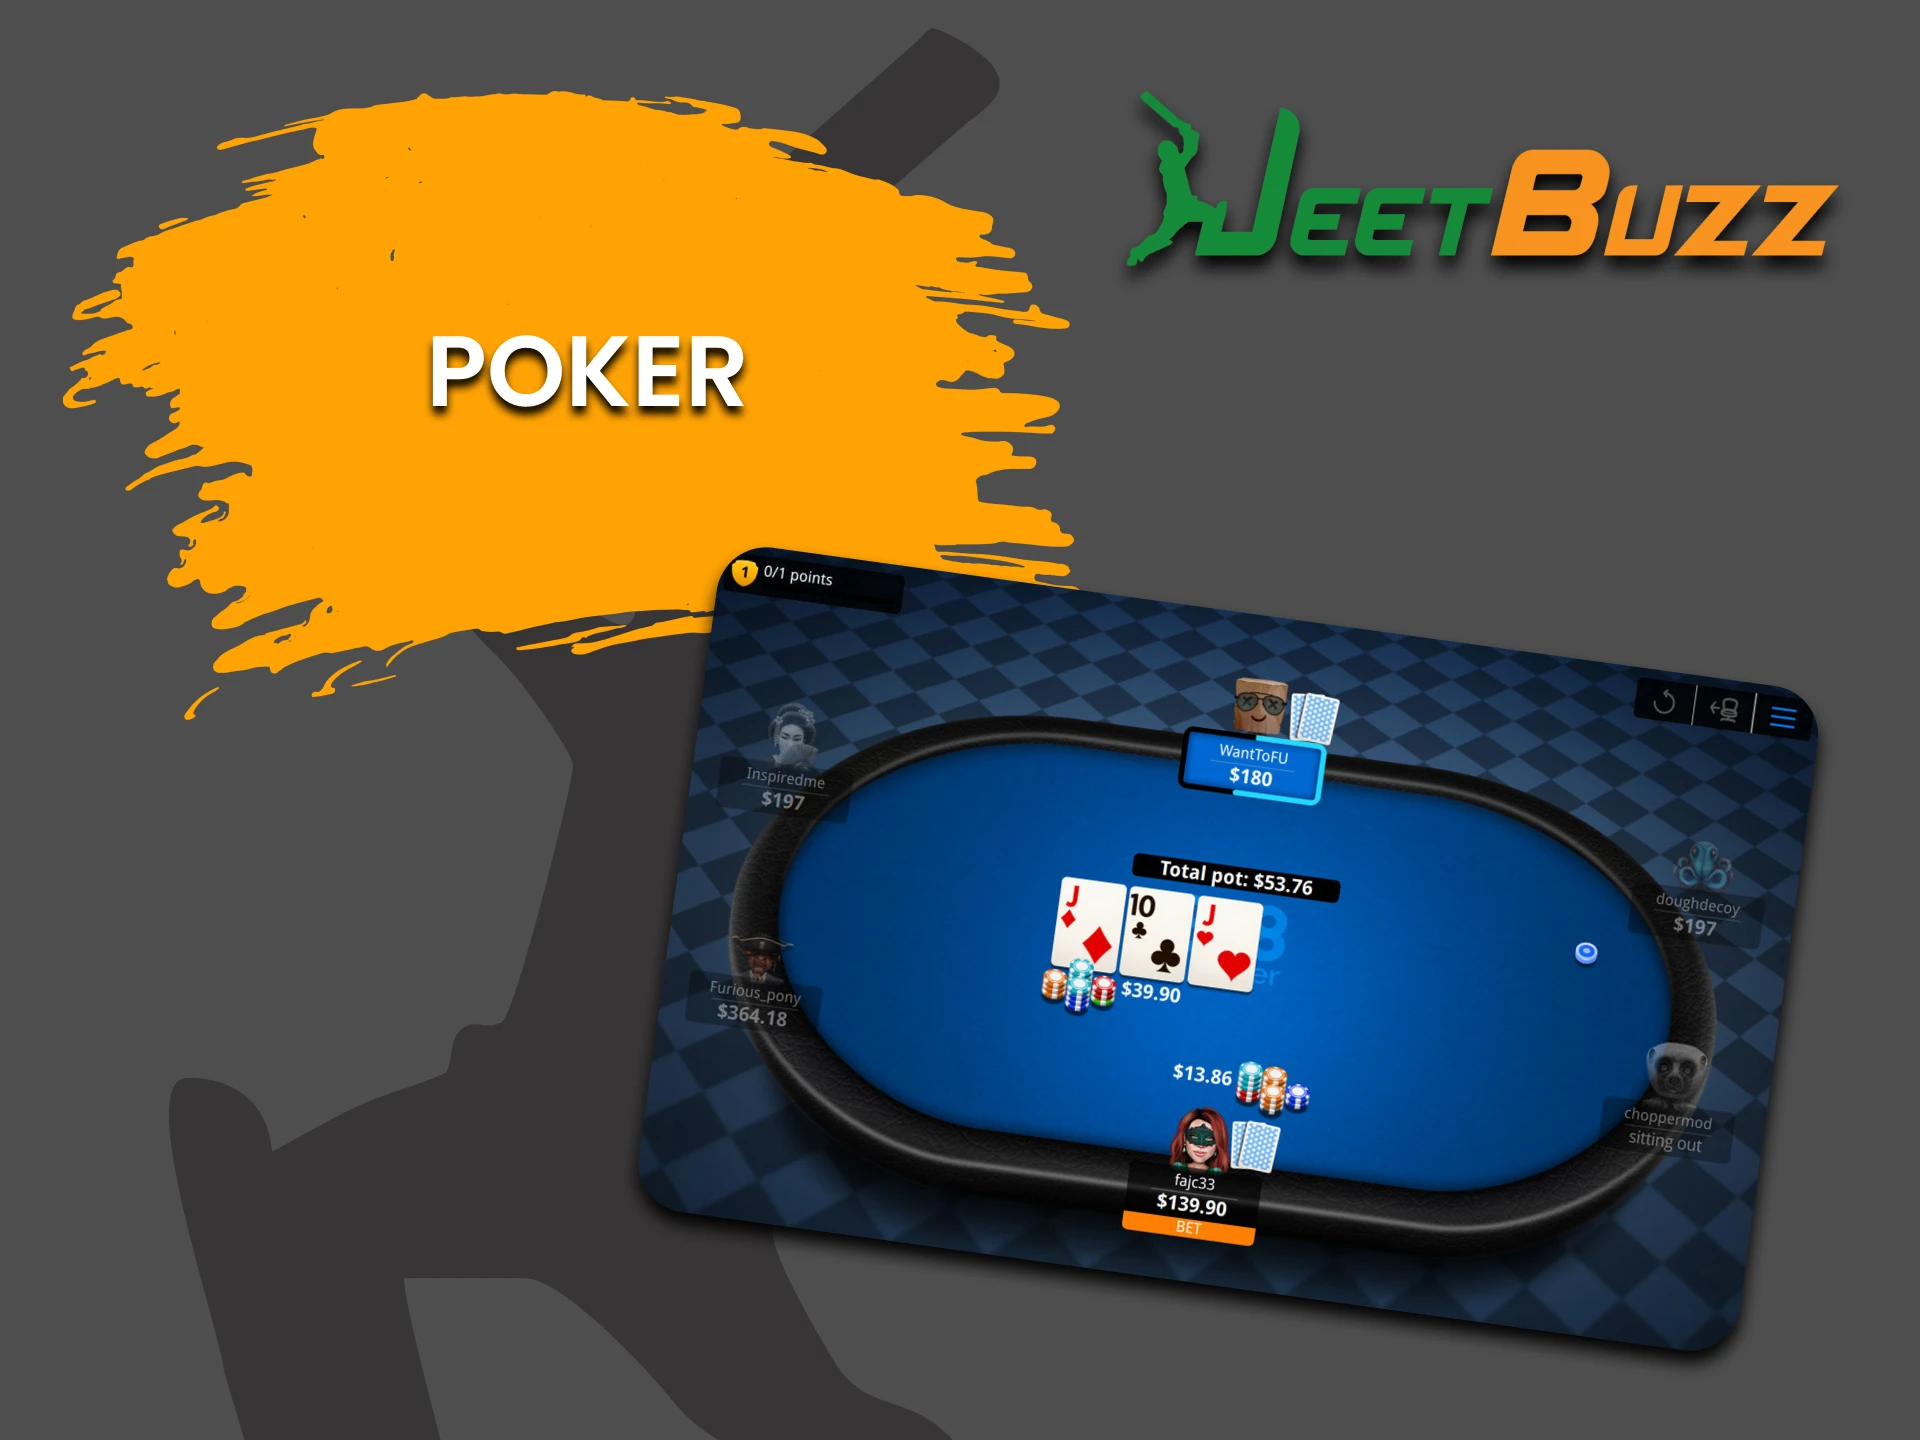 For table games from JeetBuzz, choose Poker.